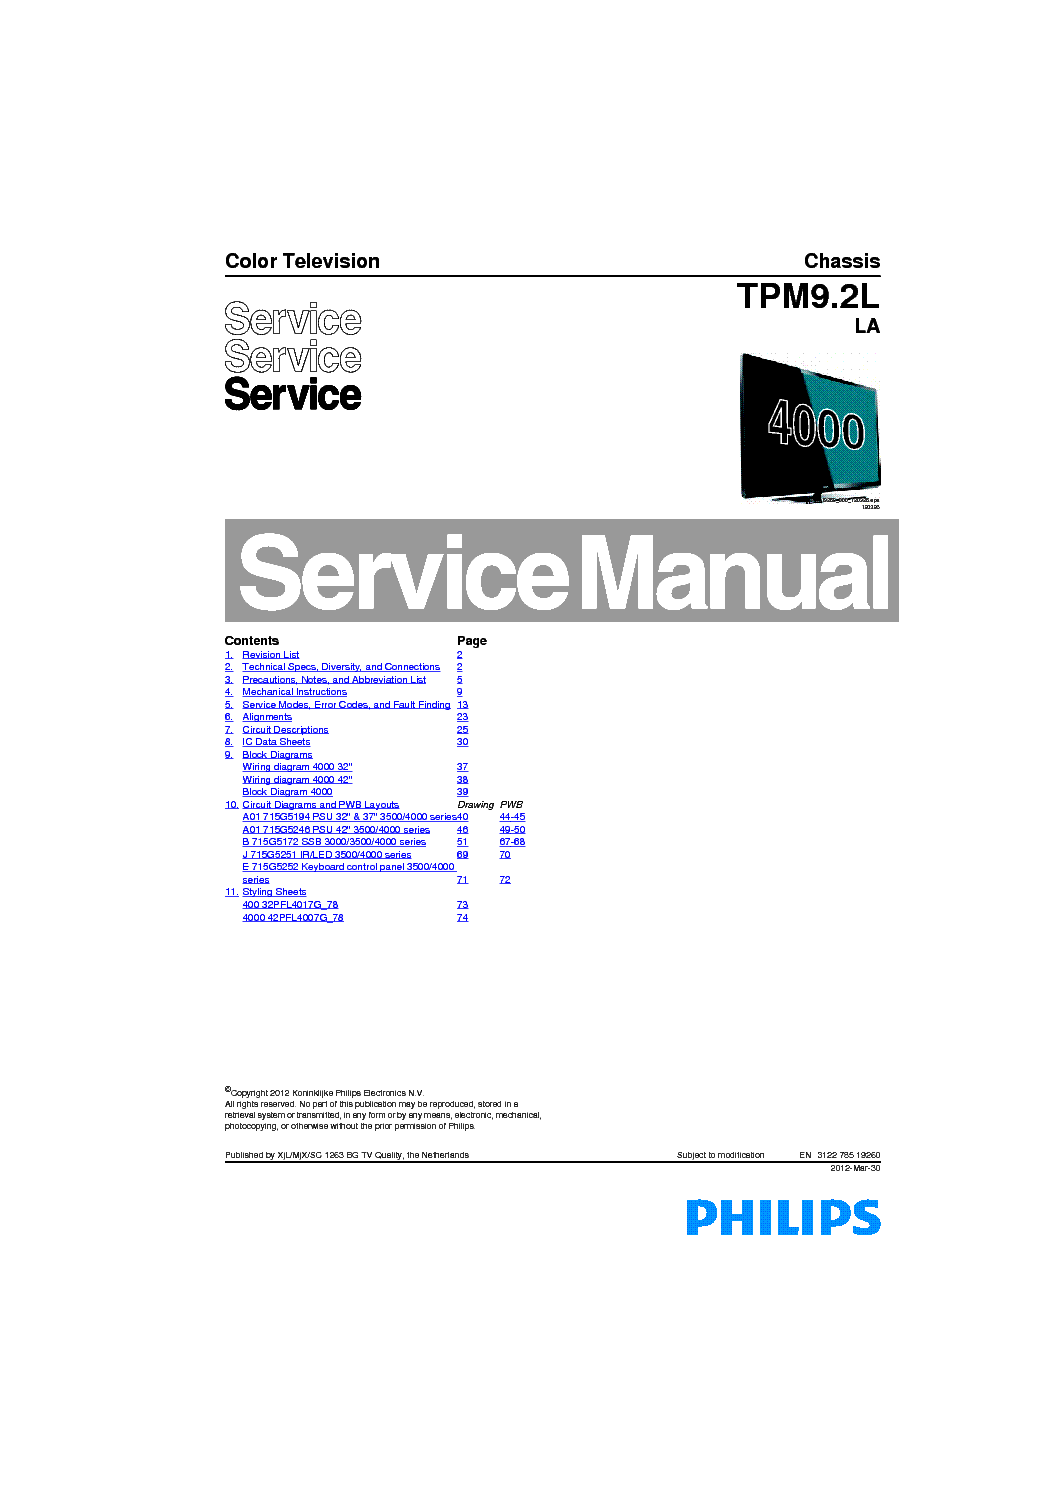 PHILIPS TPM9.2LLA 312278519260 service manual (1st page)